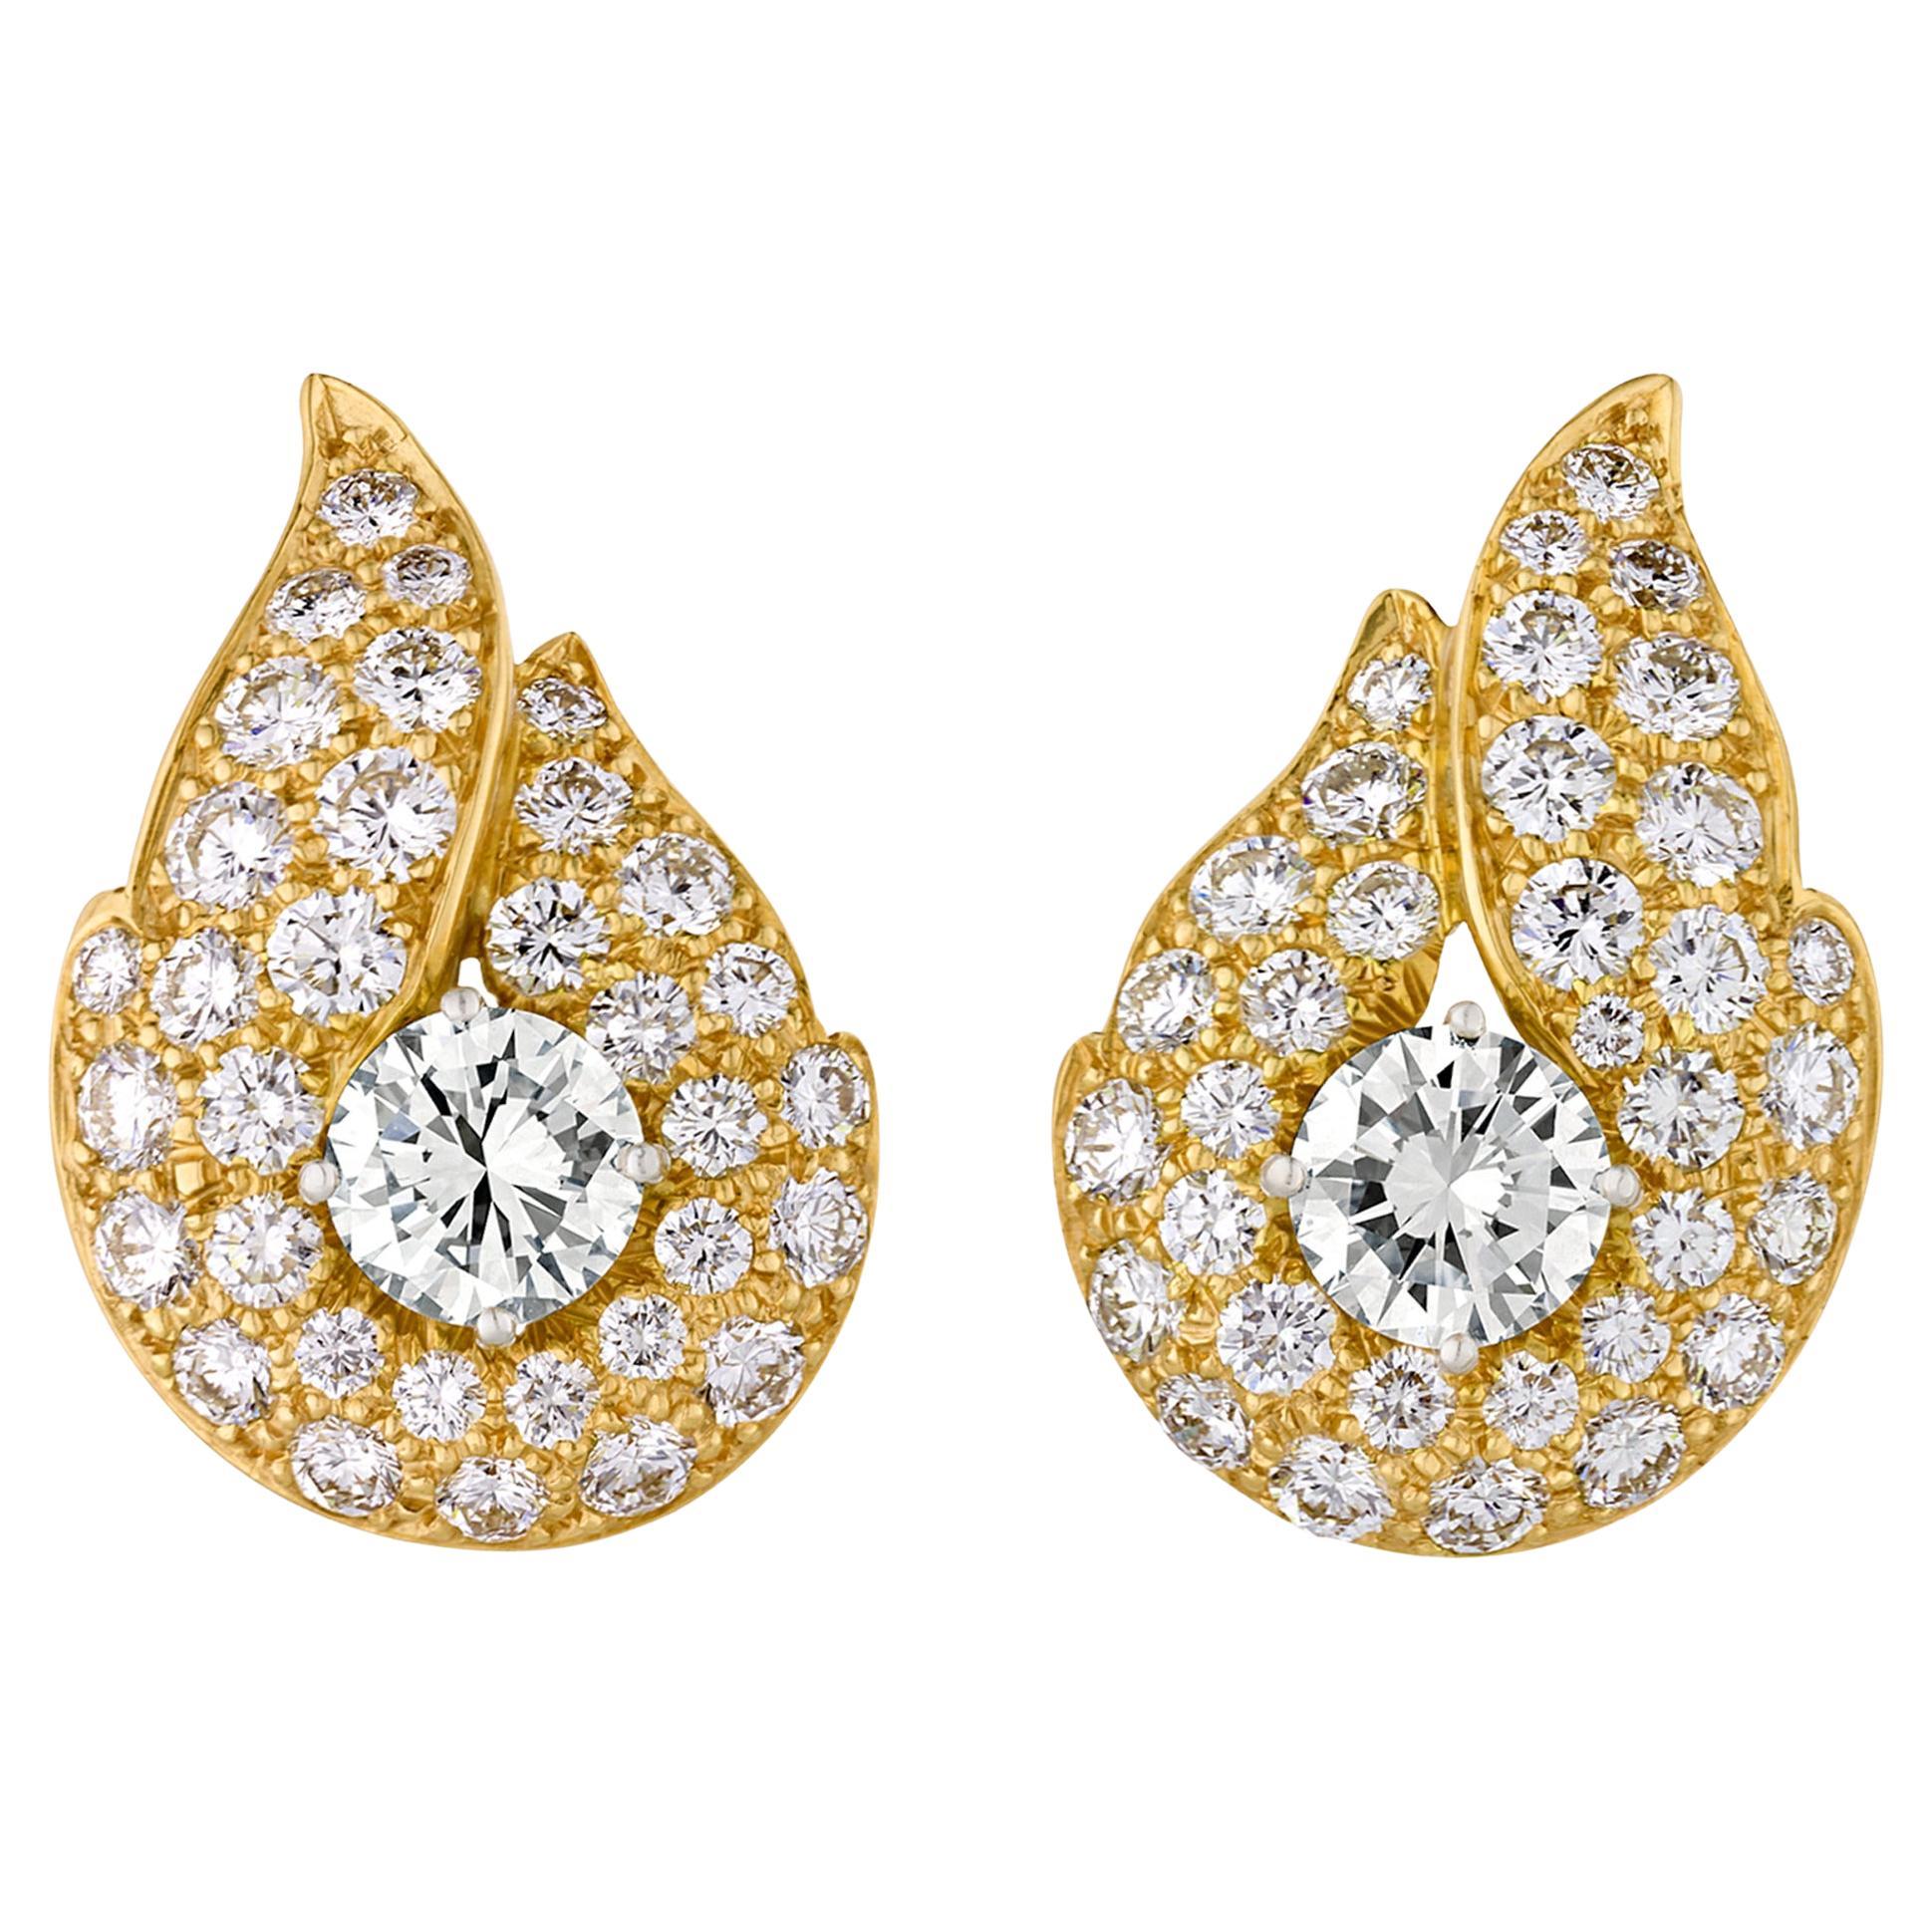 White Diamond Earrings, 2.20 Carats For Sale